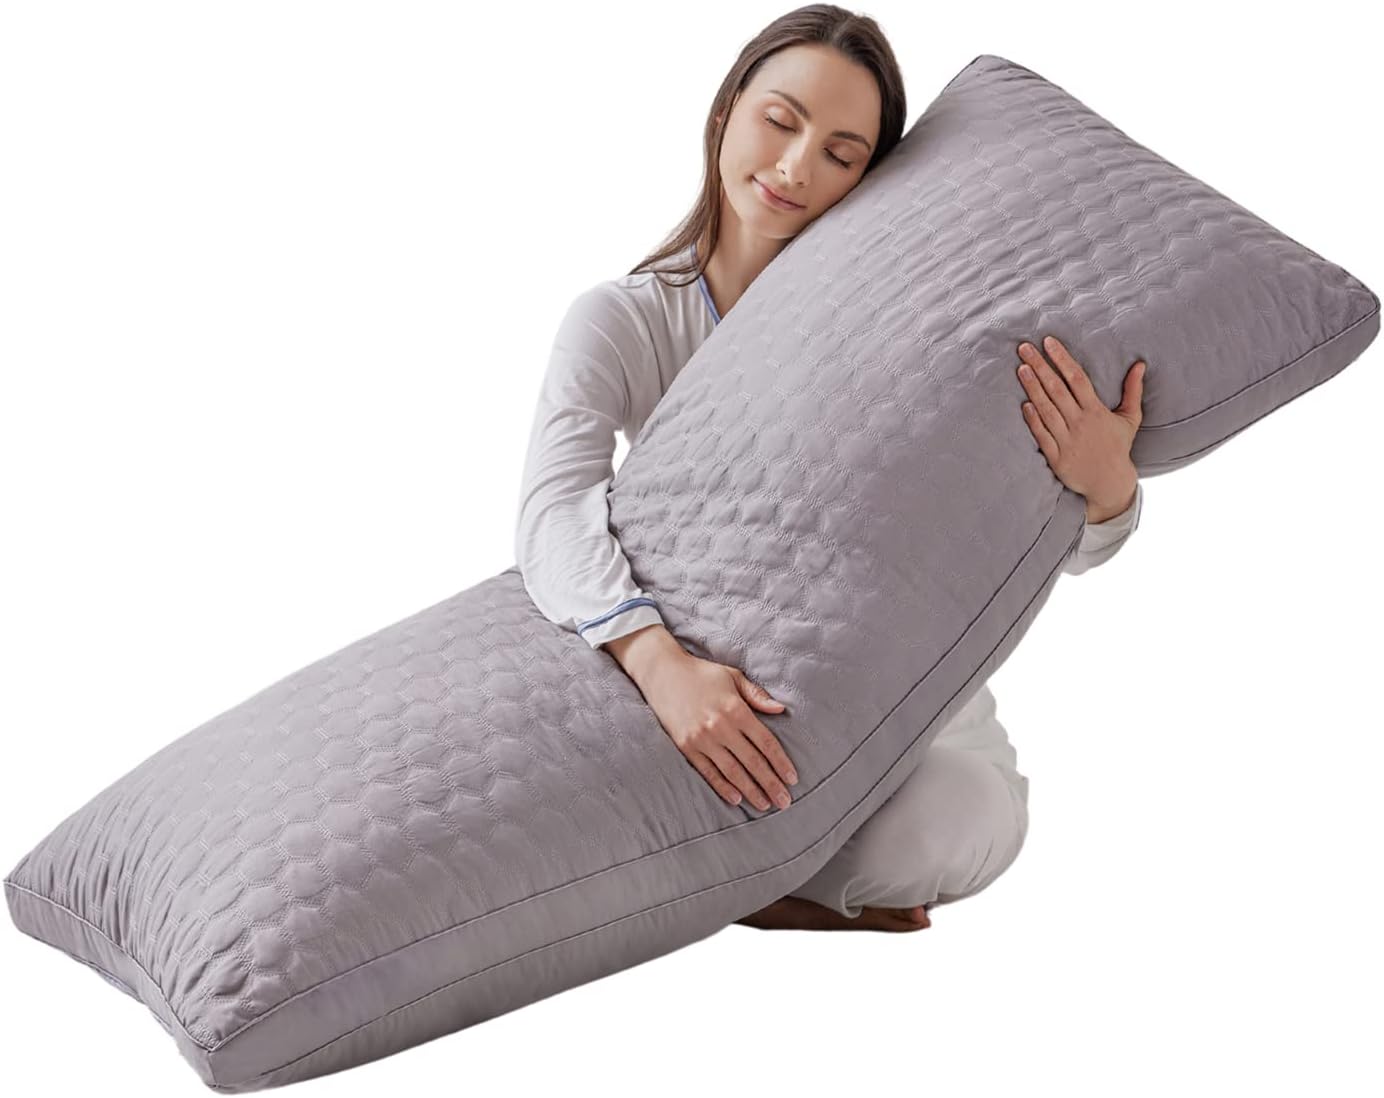 Qeils Body Pillow for Adults,Long Pillow for Sleeping, Large Pillow Insert for Side Sleepers - 21"x54"(Grey)